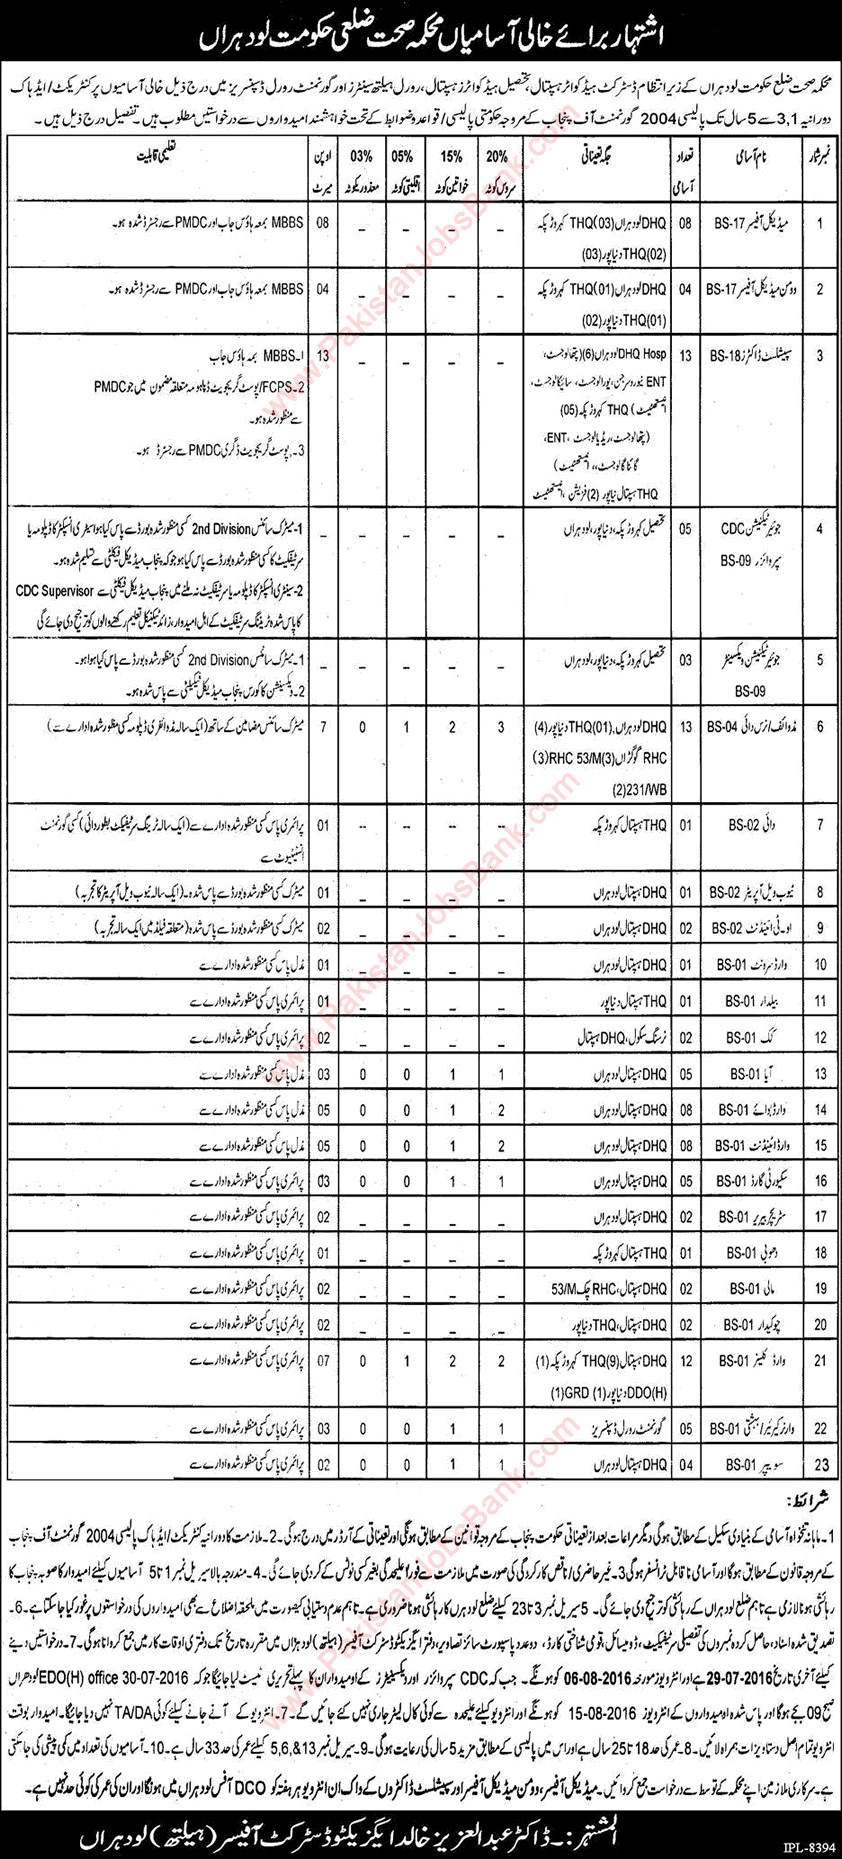 Health Department Lodhran Jobs July 2016 Medical Officers, Specialists Doctors, Midwives & Others Latest